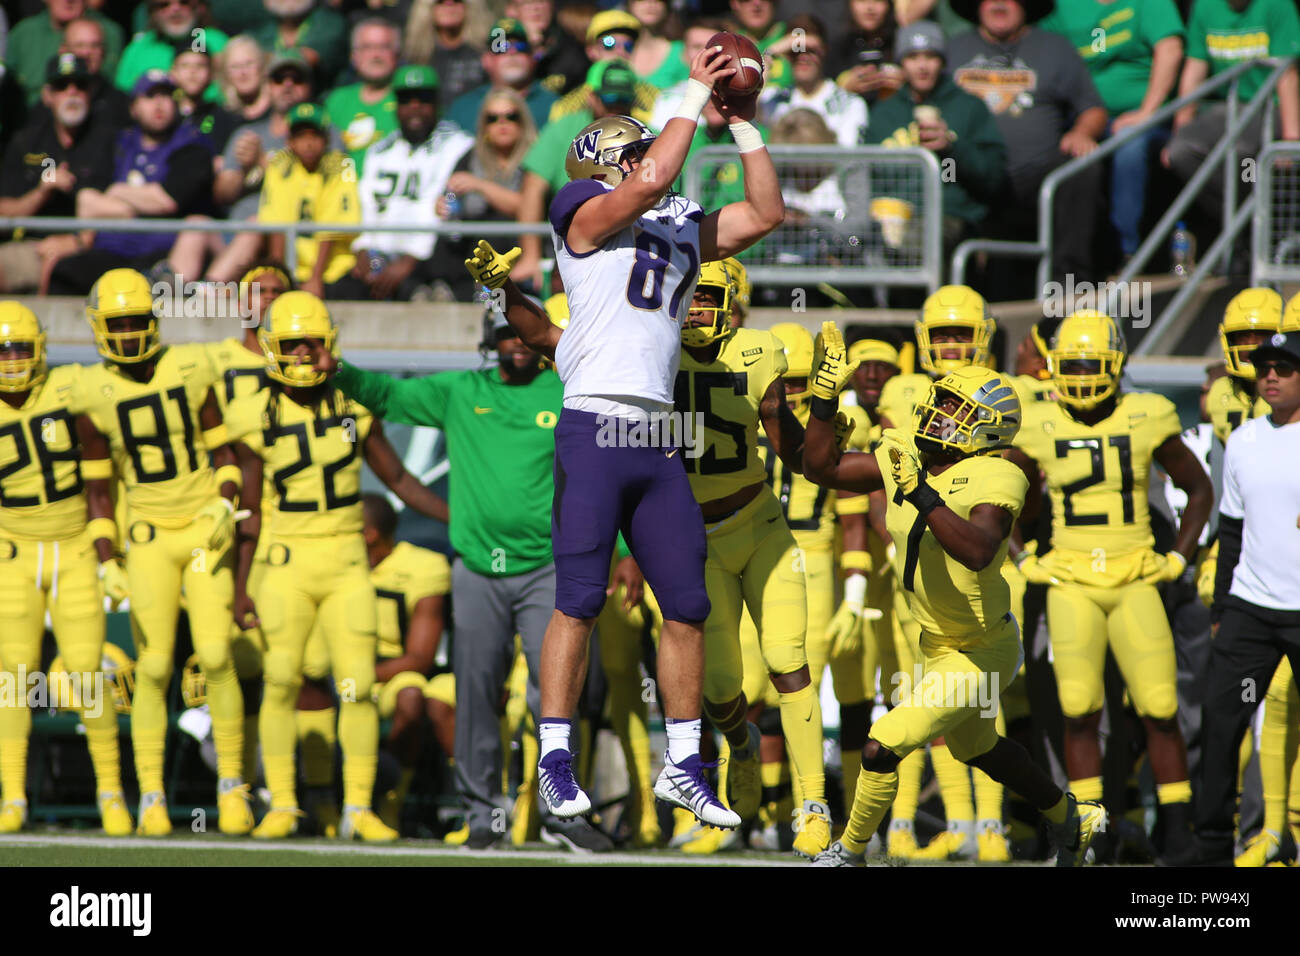 Eugene, OR, USA. 13th Oct, 2018. Washington Huskies tight end Cade Otton (87) comes down with the ball during a game between the Washington Huskies and Oregon Ducks at Autzen Stadium in Eugene, OR. Sean Brown/CSM/Alamy Live News Stock Photo